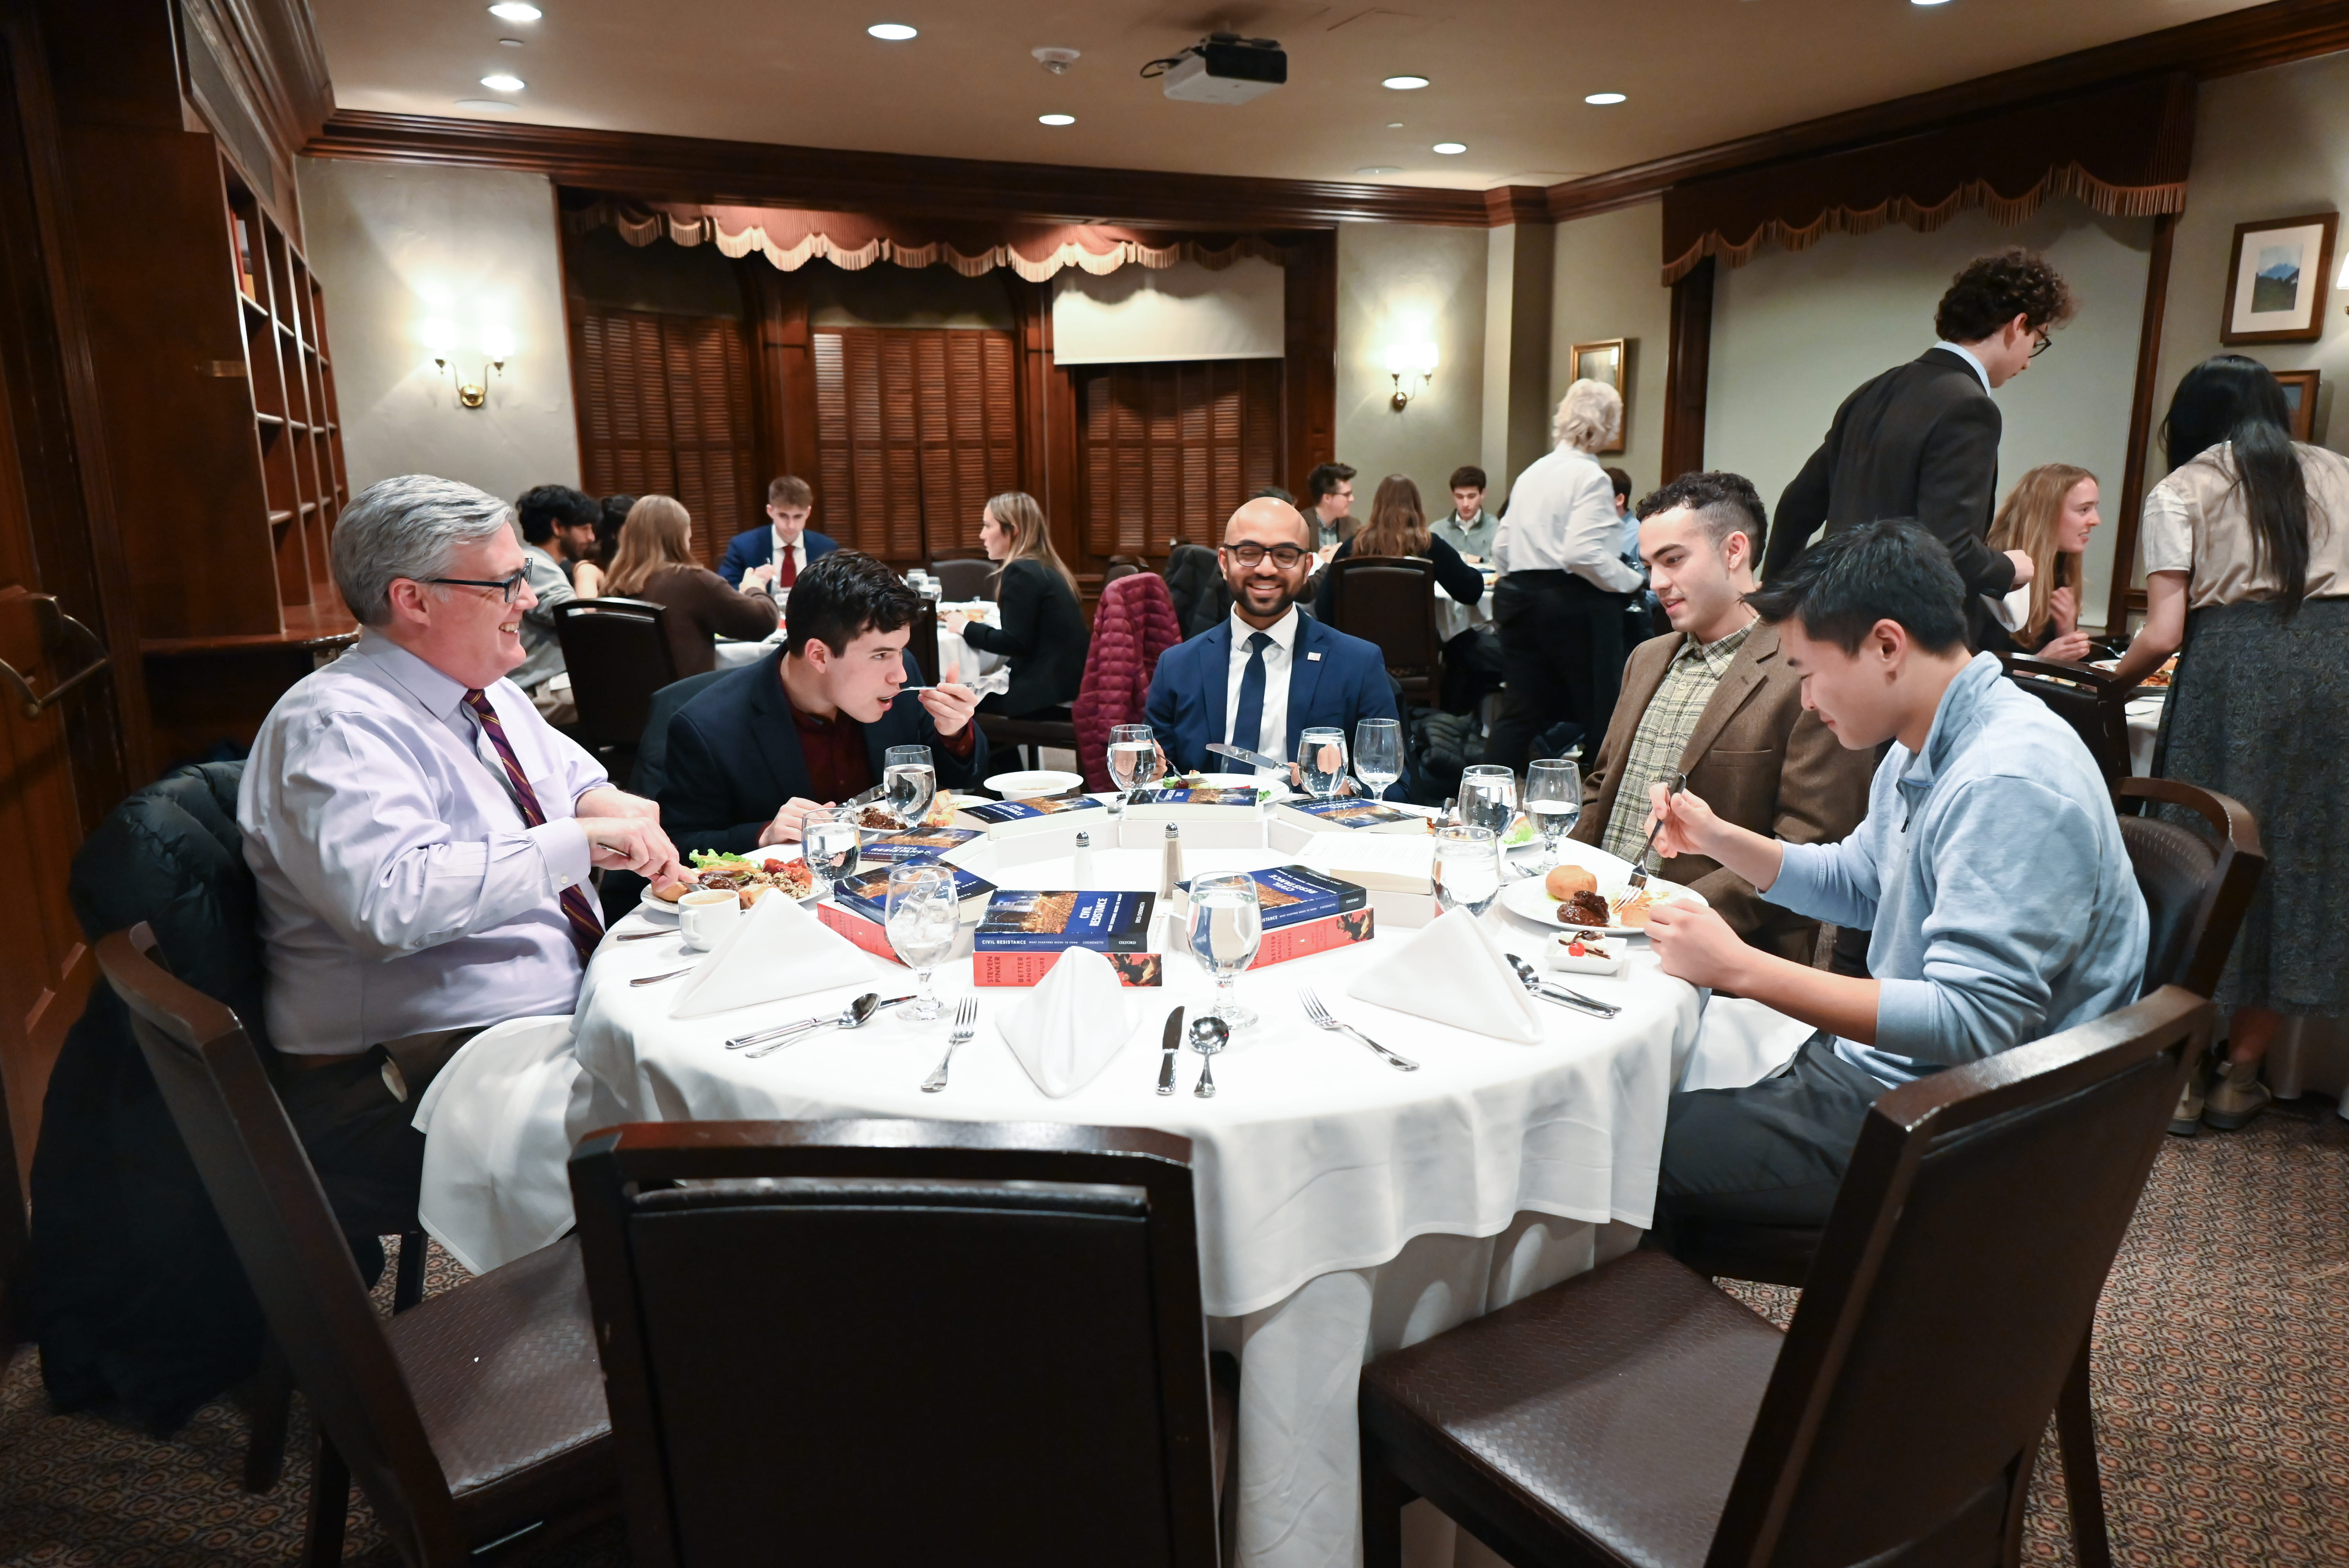 Post-faculty dialogue, student administrators further discuss the topic over a shared meal.